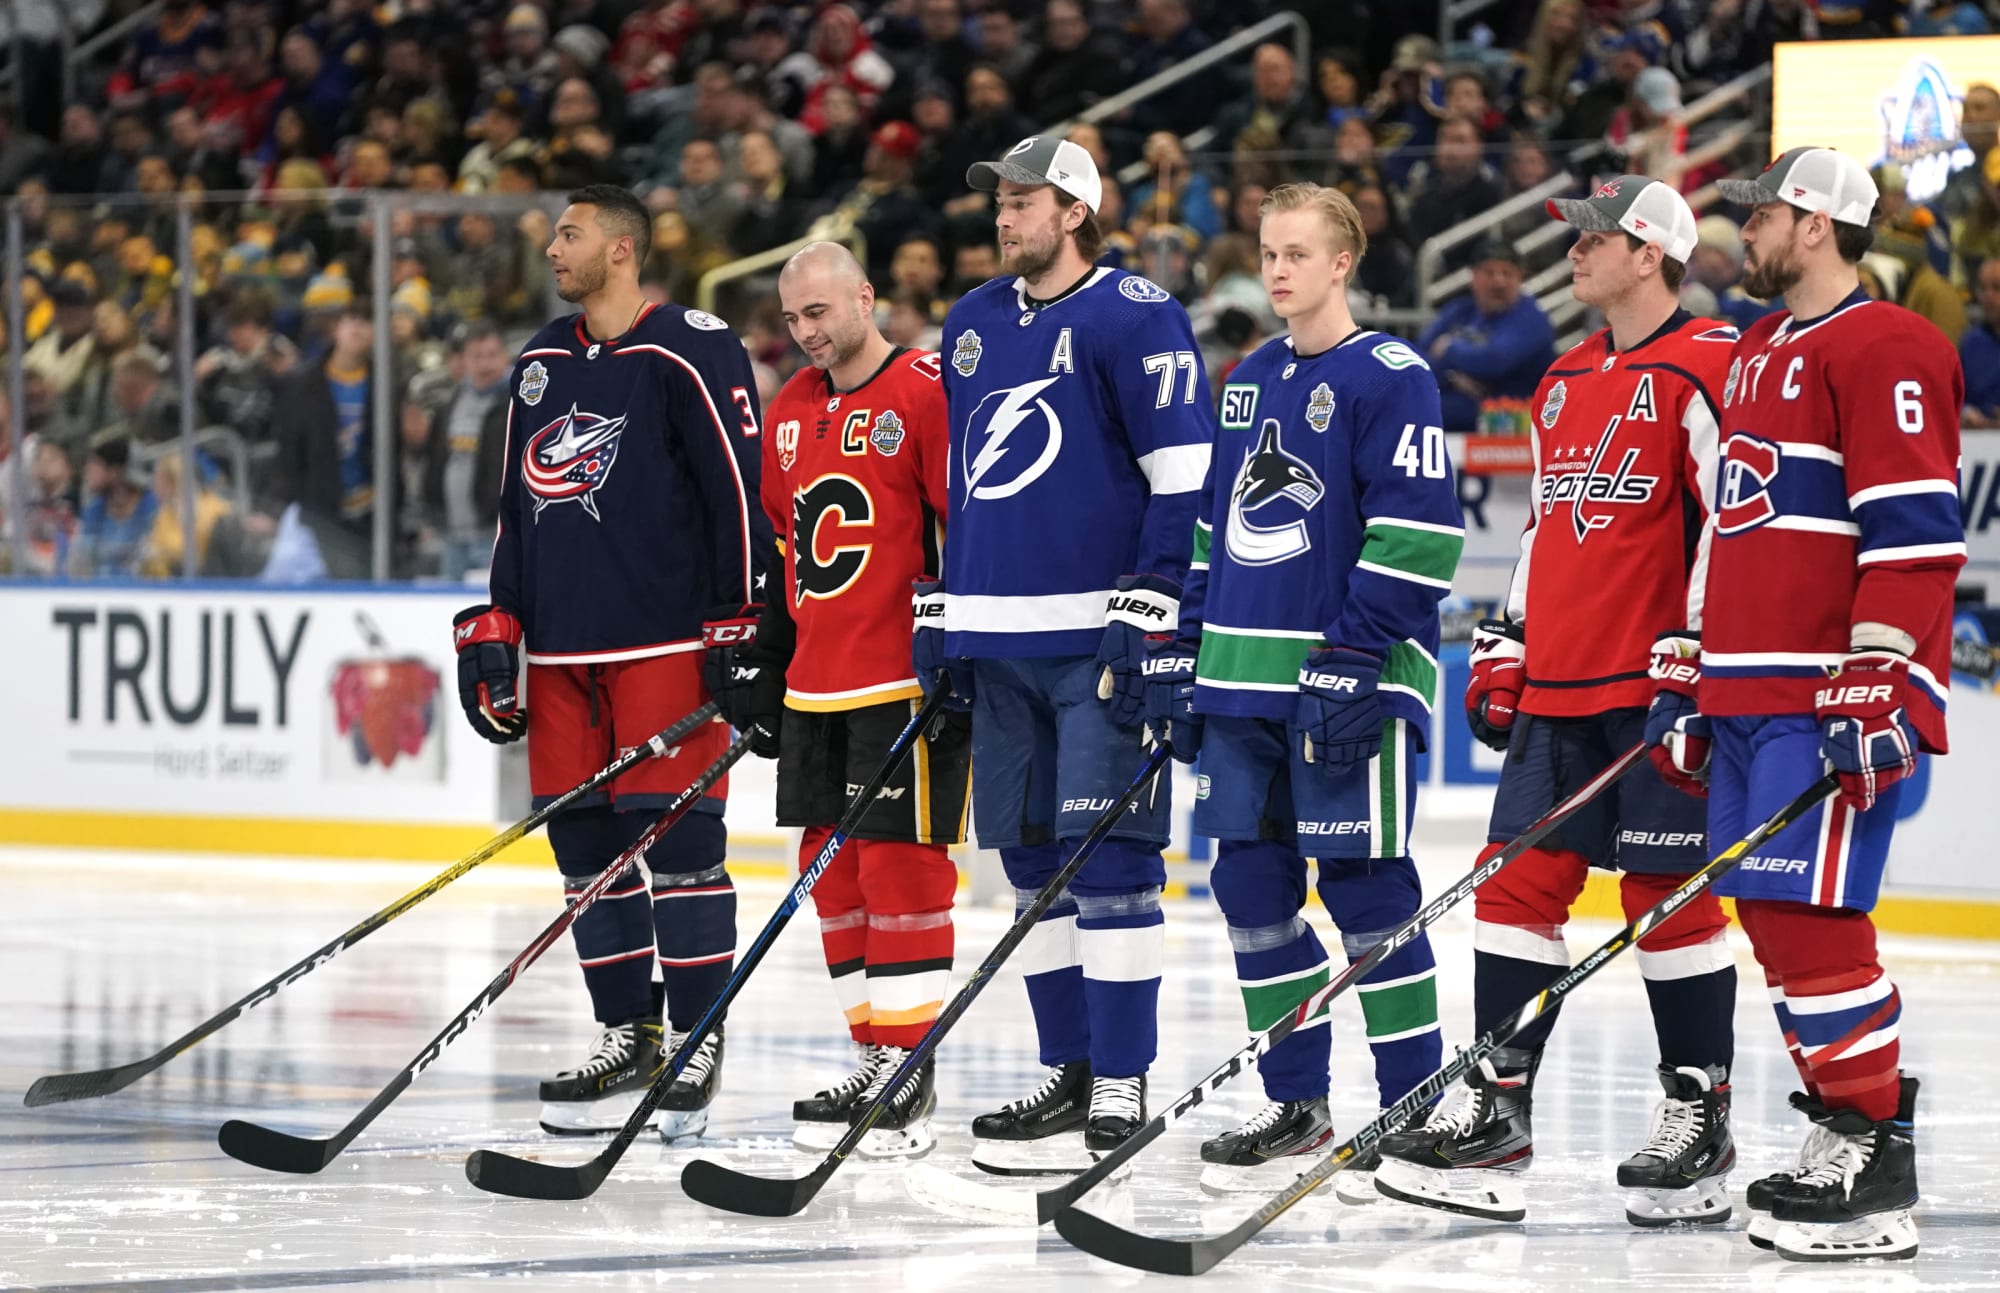 2020 NHL All-Star Game: Rosters, TV 